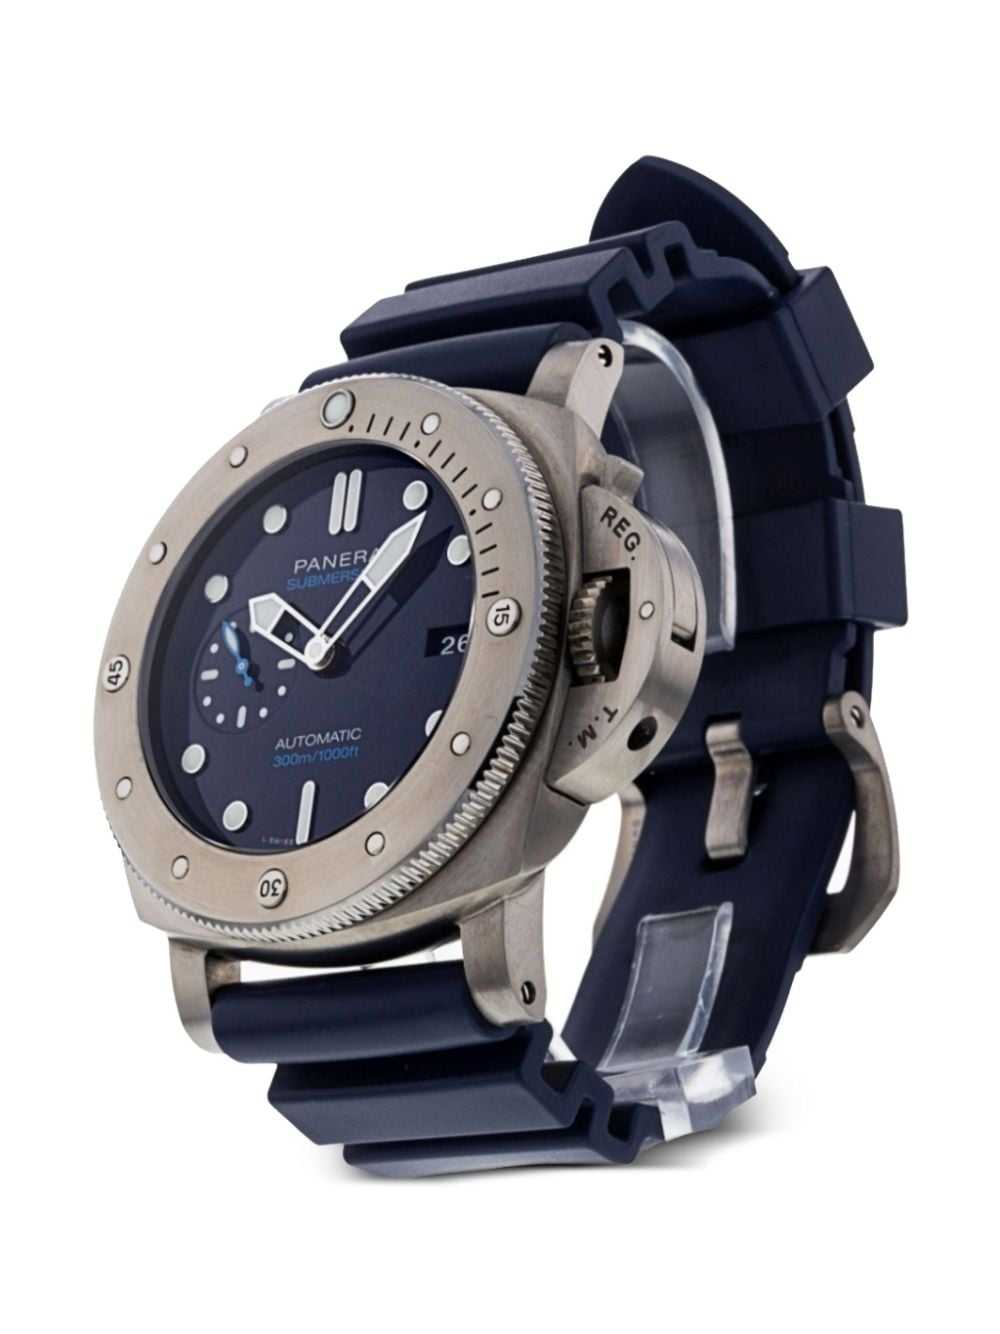 Panerai pre-owned Submersible 47mm - Blue - image 3